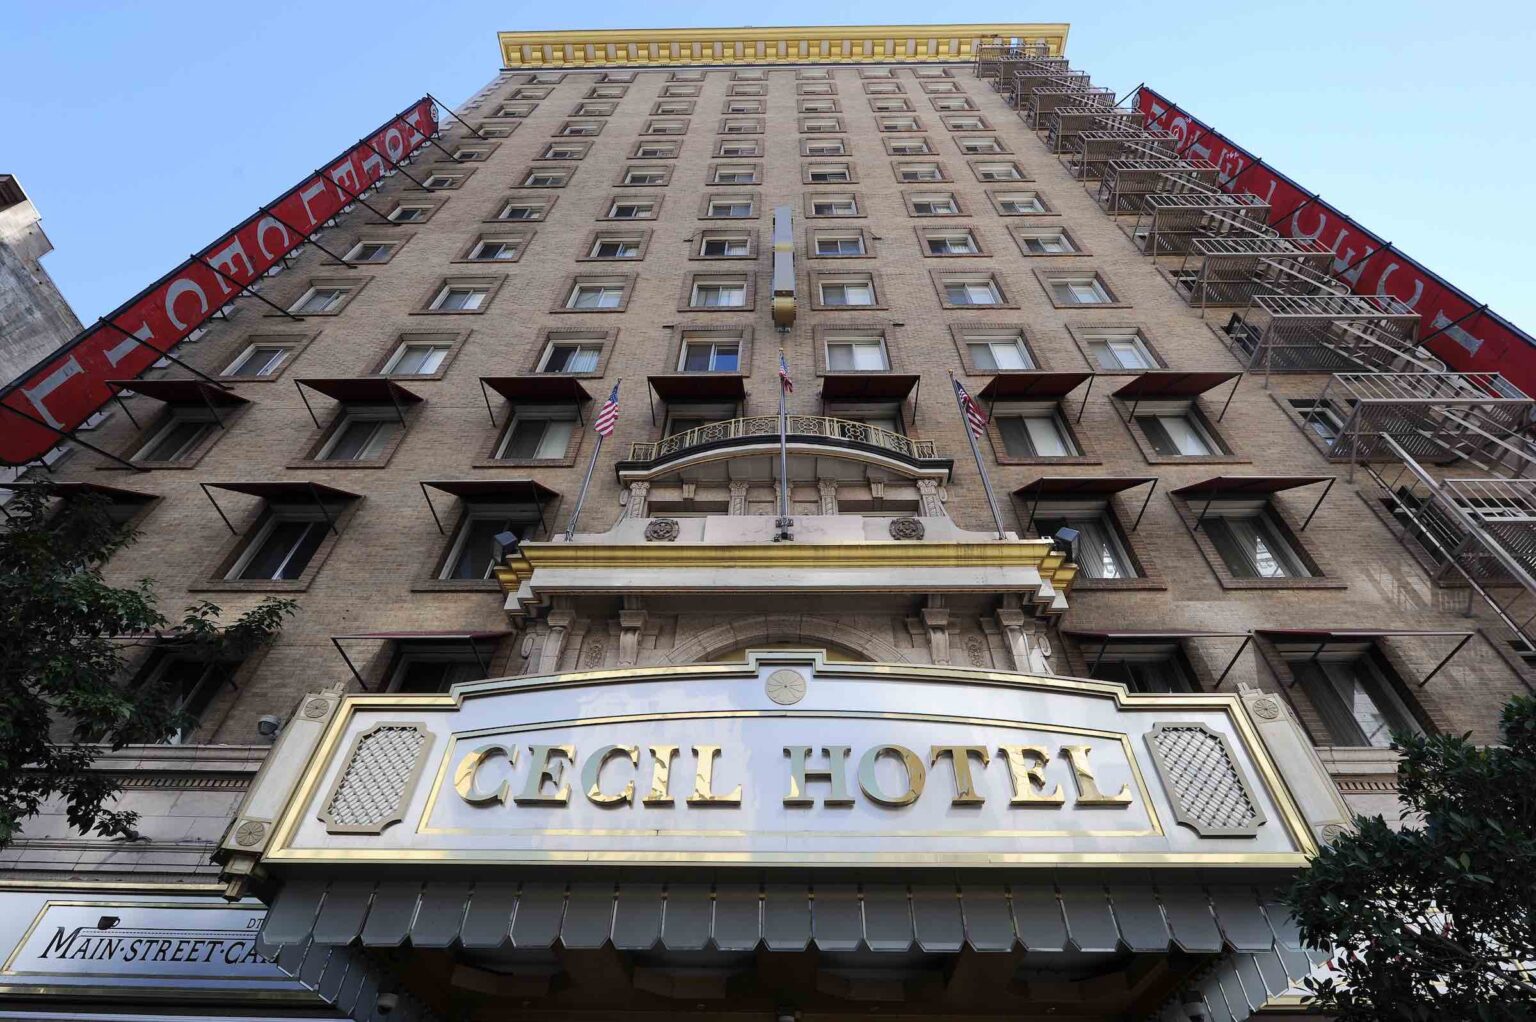 Elisa Lam disappeared while staying at the infamous Cecil Hotel. What happened and why? Nobody is sure to this day.